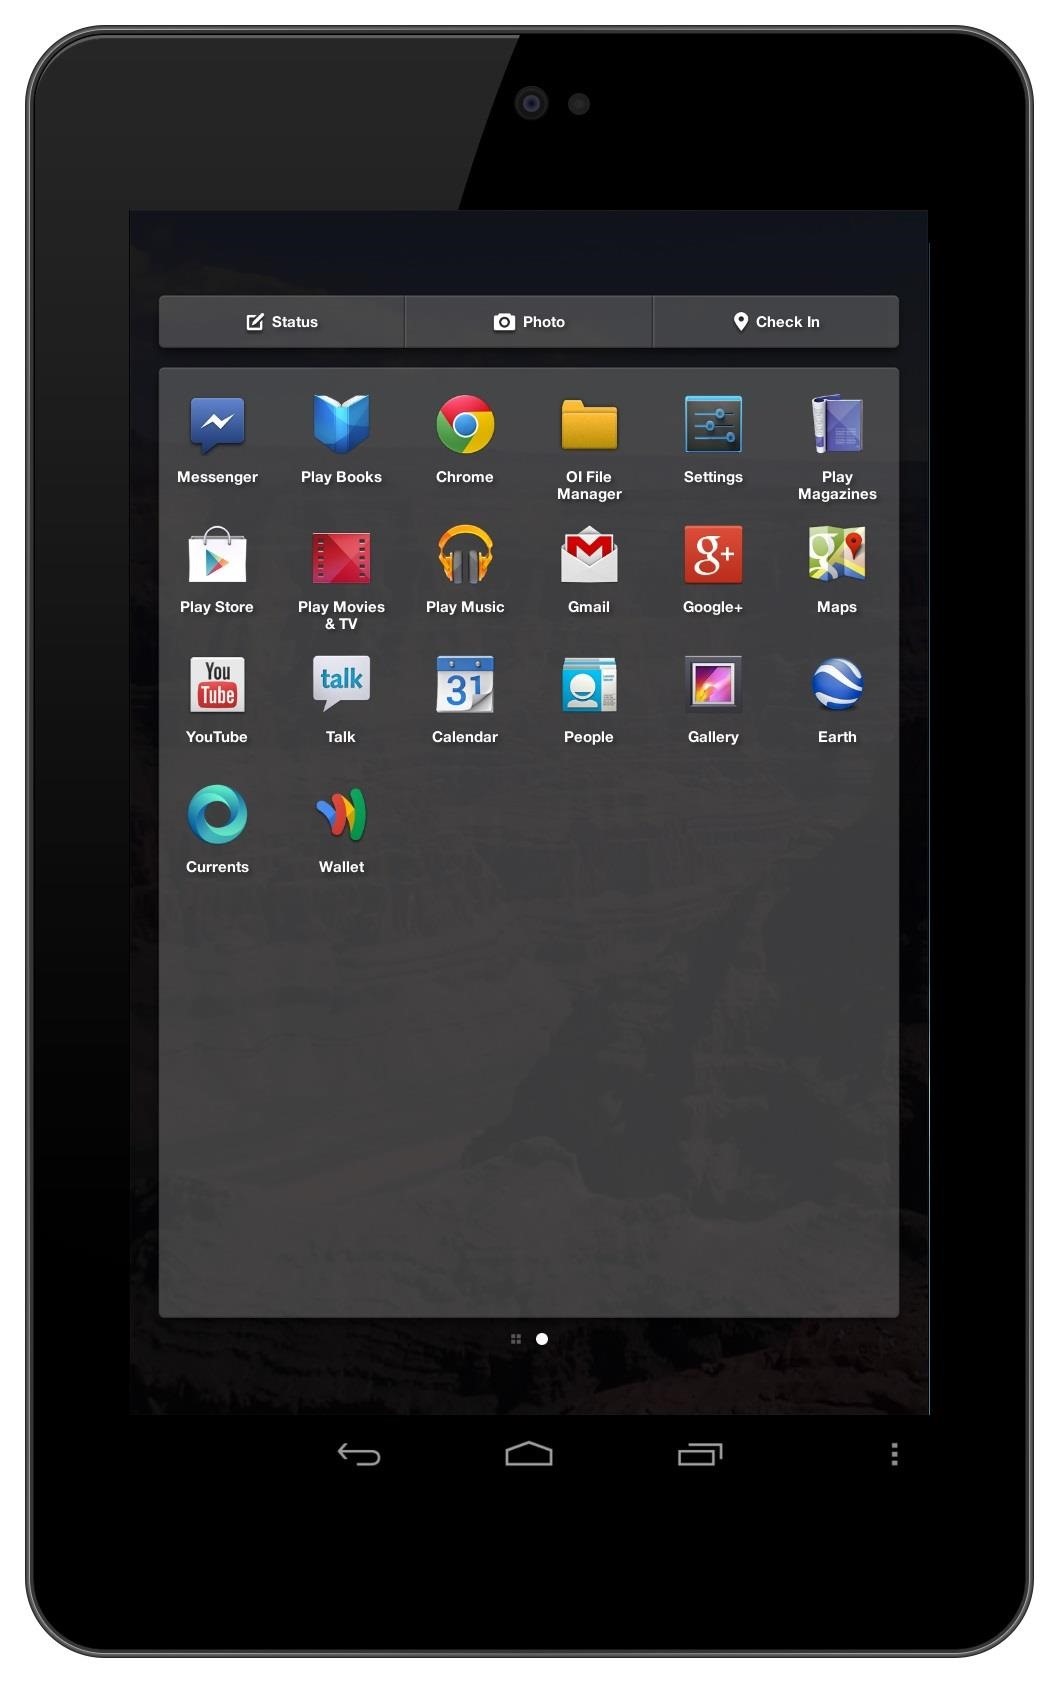 How to Install the New Facebook Home Launcher on Your Nexus 7 Tablet